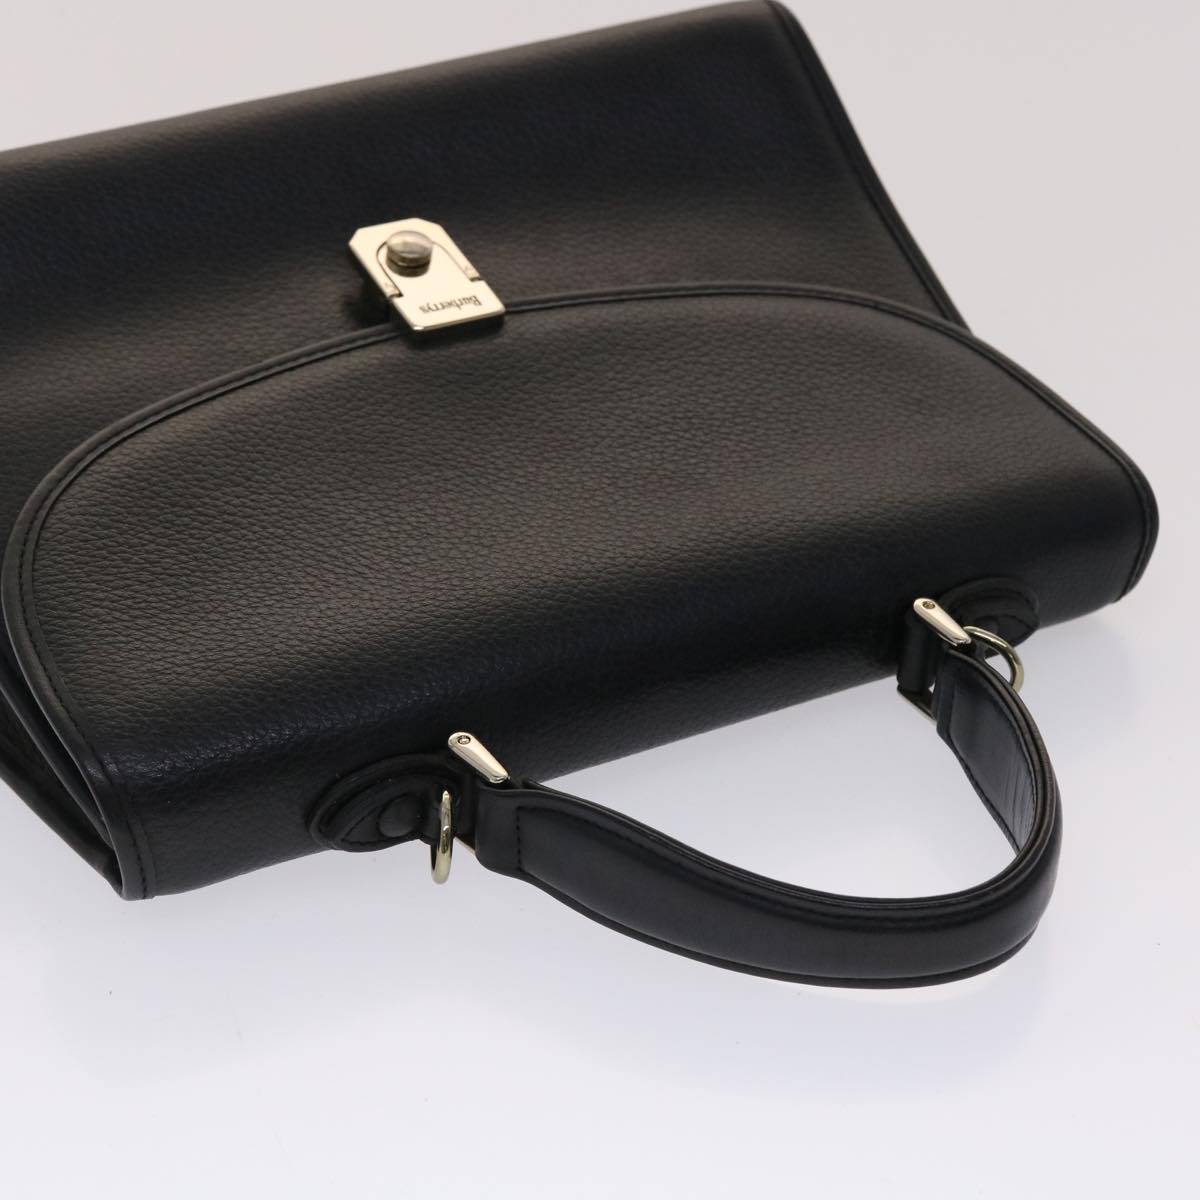 Burberrys Hand Bag Leather Black Auth 48107